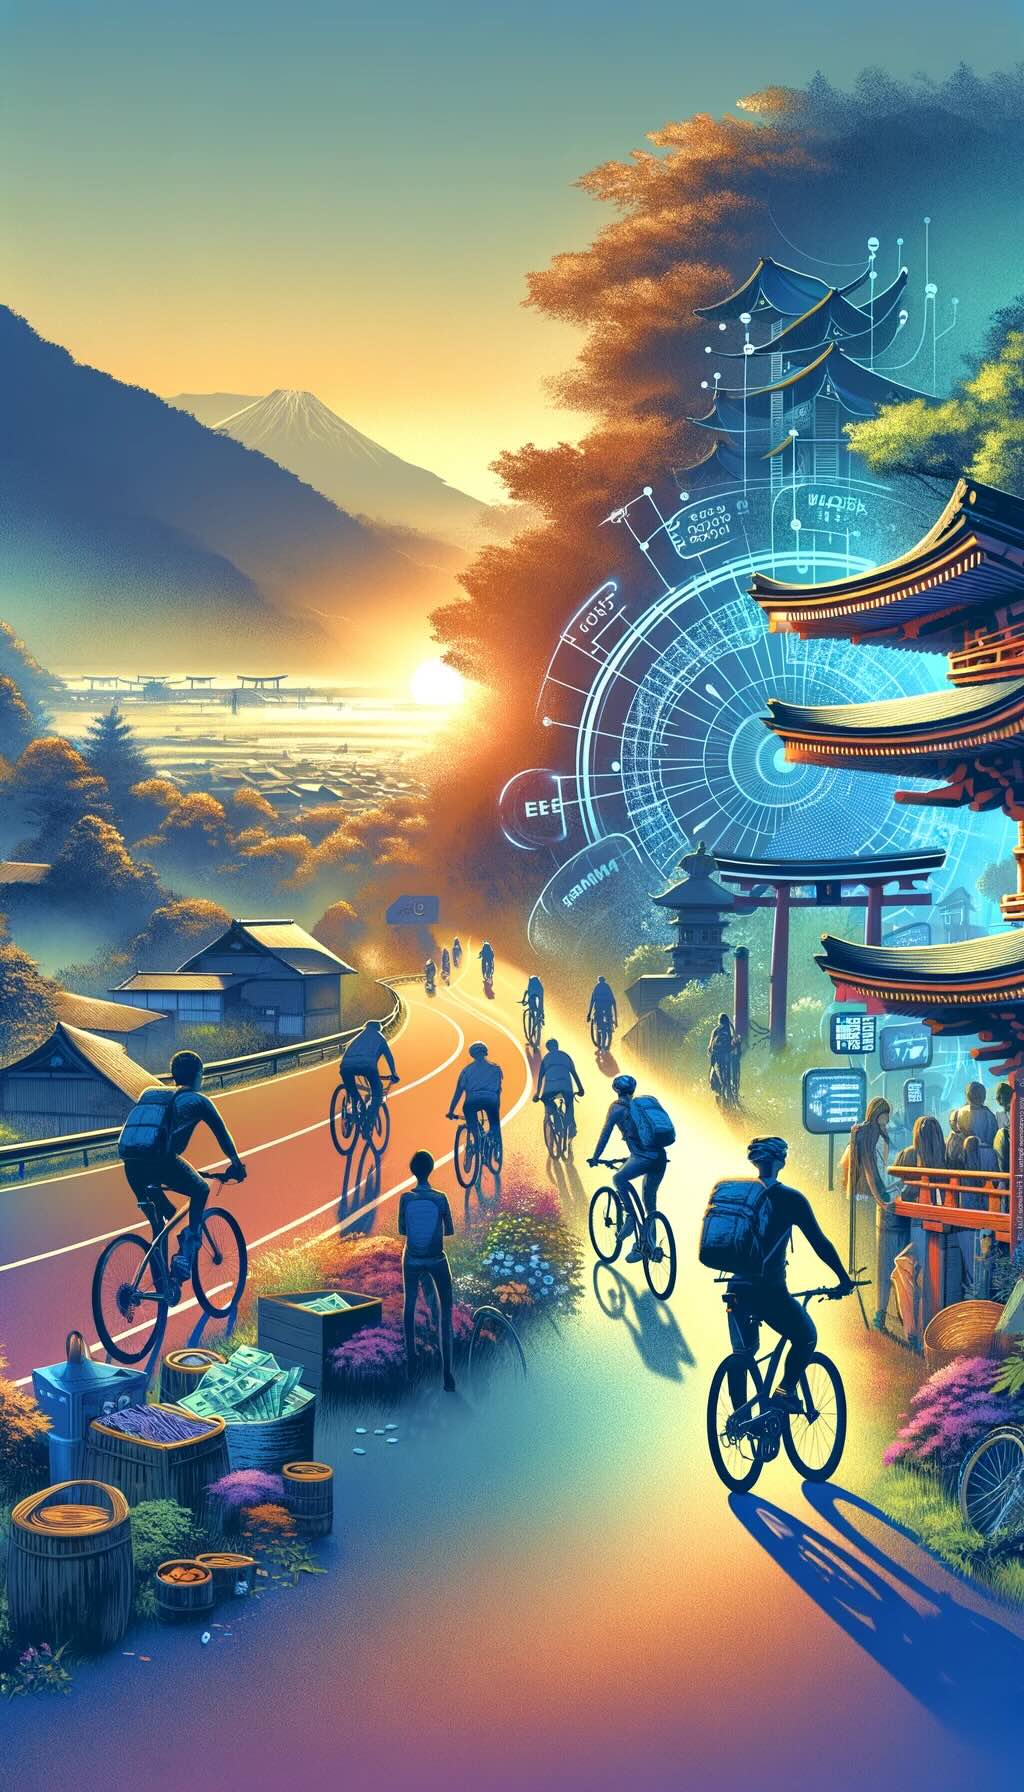 Benefits of biking in Japan, focusing on both improved health and well-being, as well as economic advantages depicts scenes of cyclists enjoying the serene Japanese countryside, highlighting the positive impact of cycling on both physical and mental health, along with the economic efficiency and freedom it offers to travelers